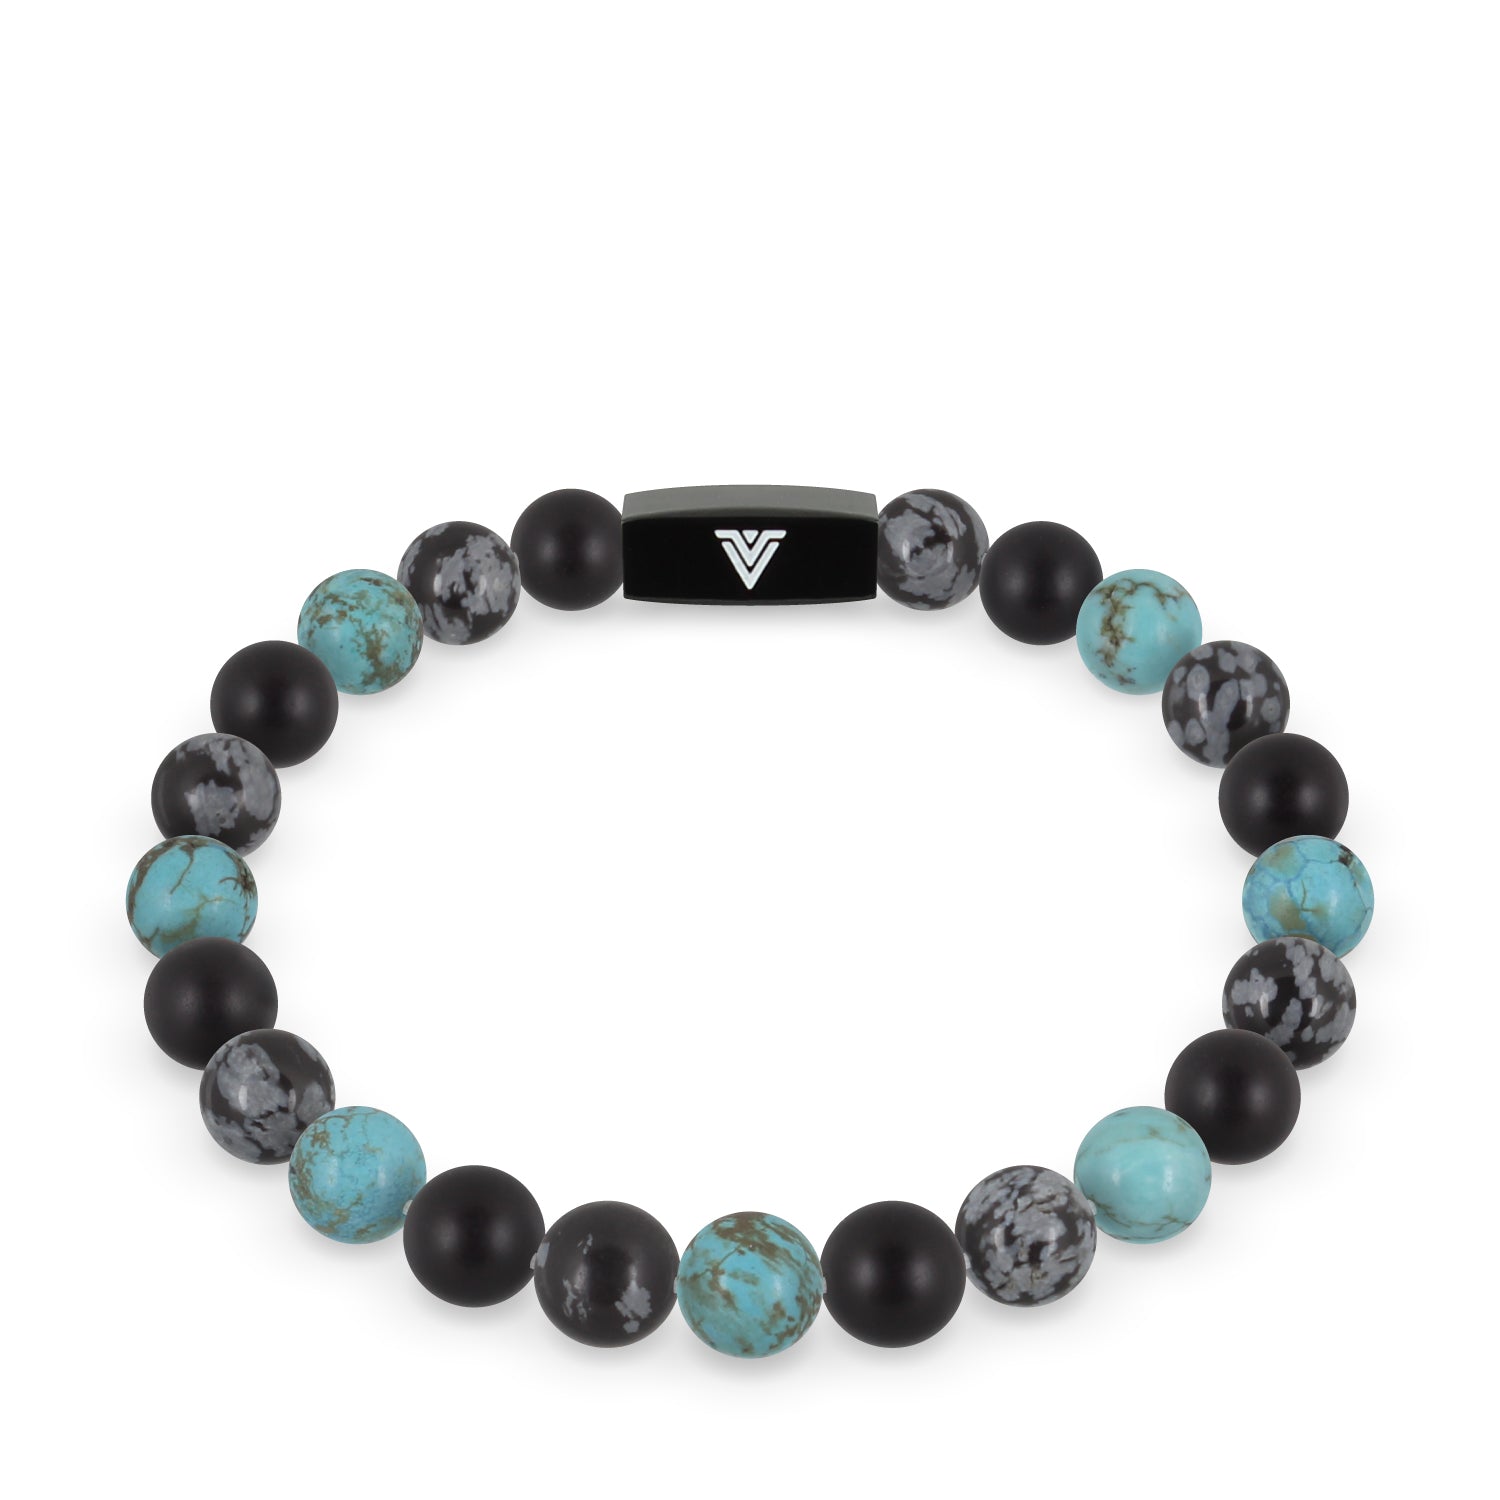 Front view of an 8mm Sagittarius Zodiac crystal beaded stretch bracelet with black stainless steel logo bead made by Voltlin